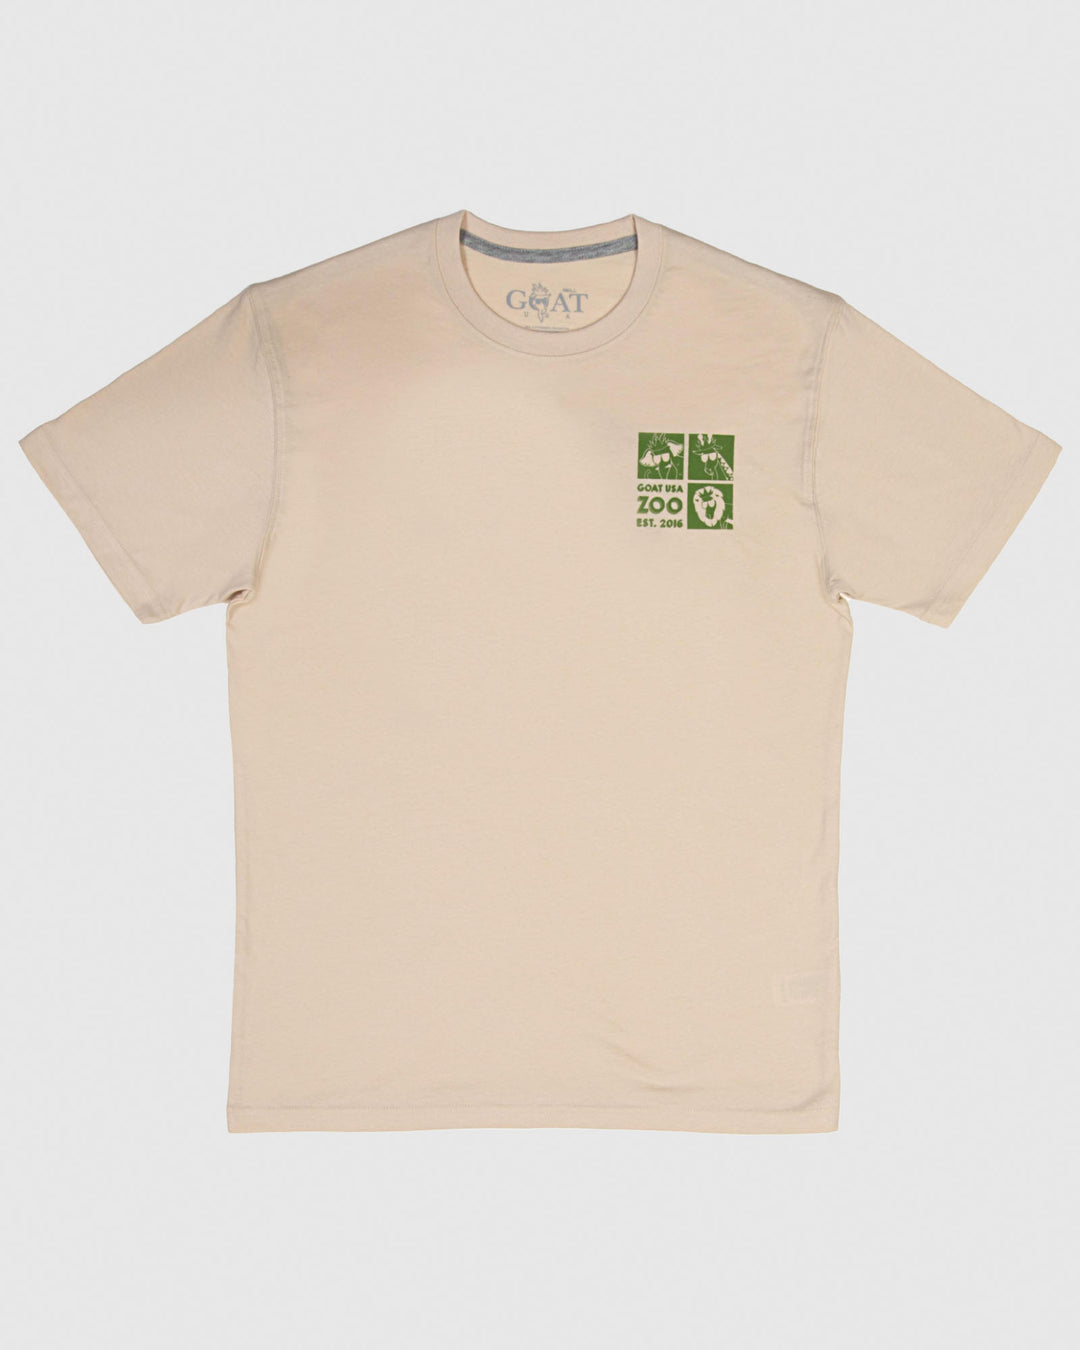 Sandshell-colored t-shirt with animals design